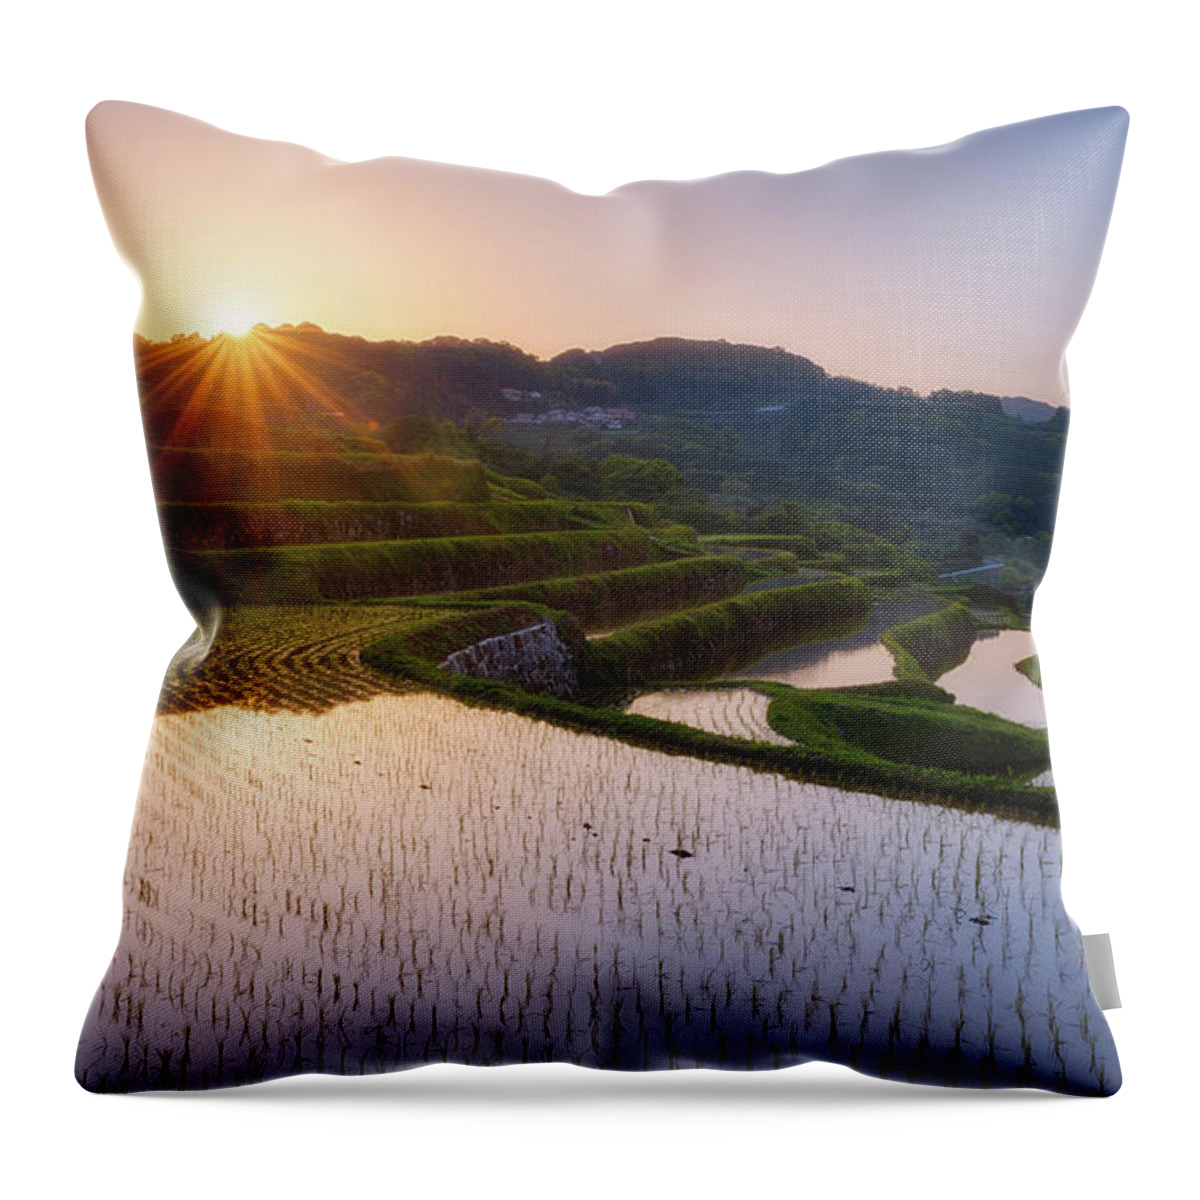 Tranquility Throw Pillow featuring the photograph Oura Rice Terraces During Sunrise by Agustin Rafael C. Reyes